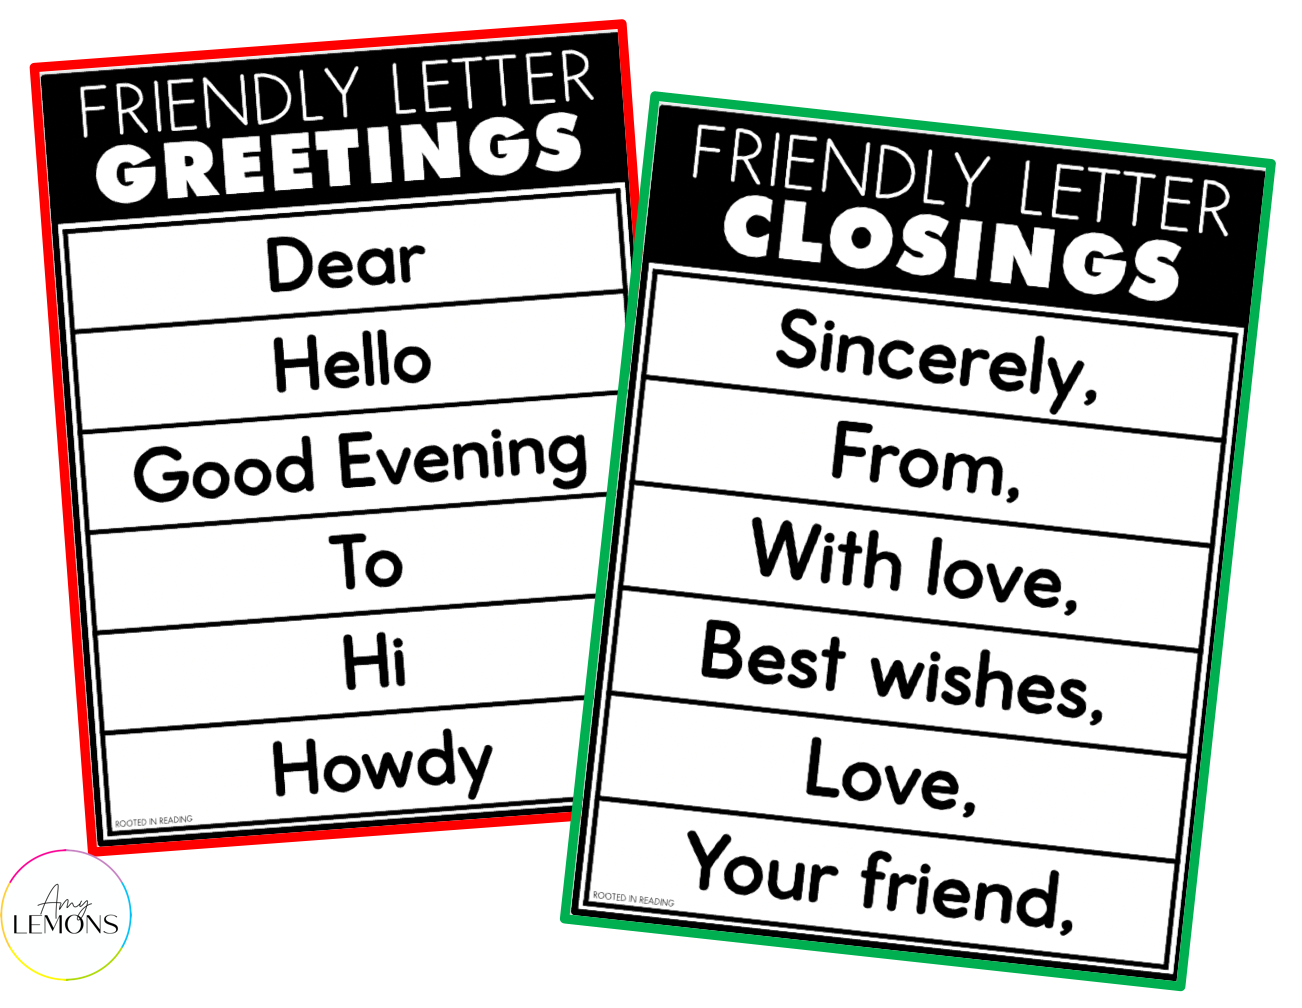 Letter greetings and closings posters